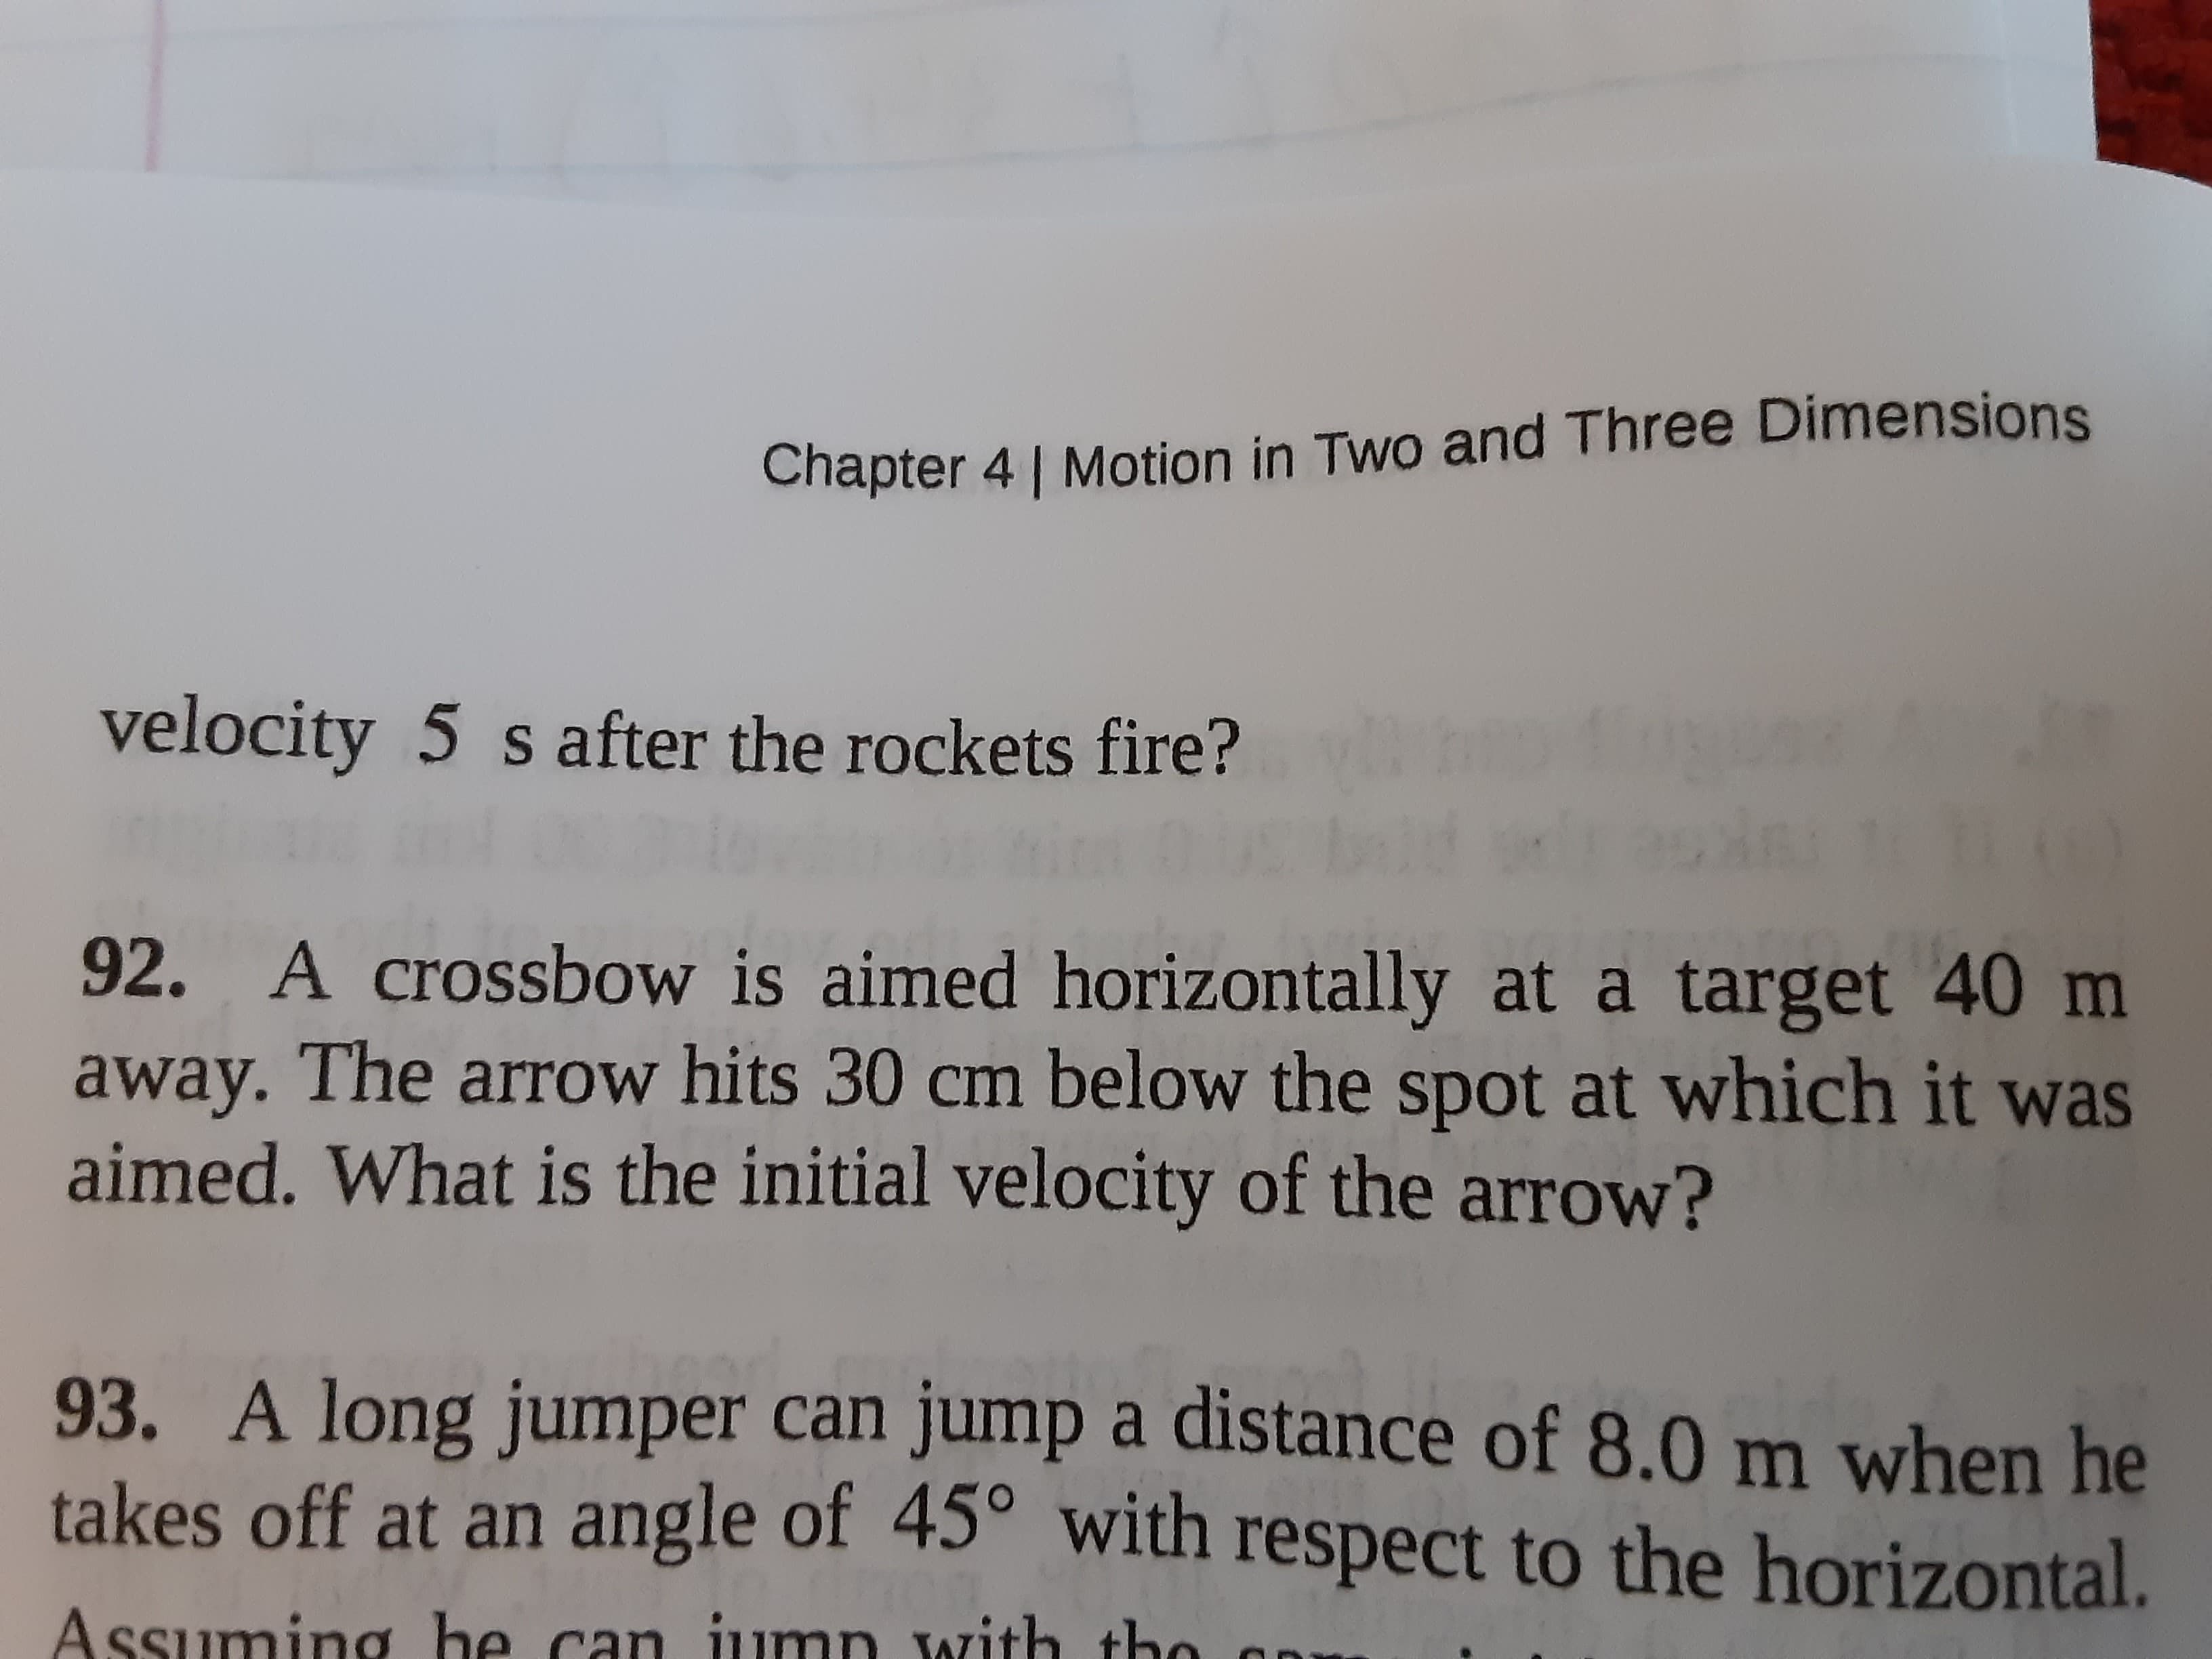 92. A crossbow is aimed horizontally at a target 40 m
away. The arrow hits 30 cm below the spot at which it was
aimed. What is the initial velocity of the arrow?
